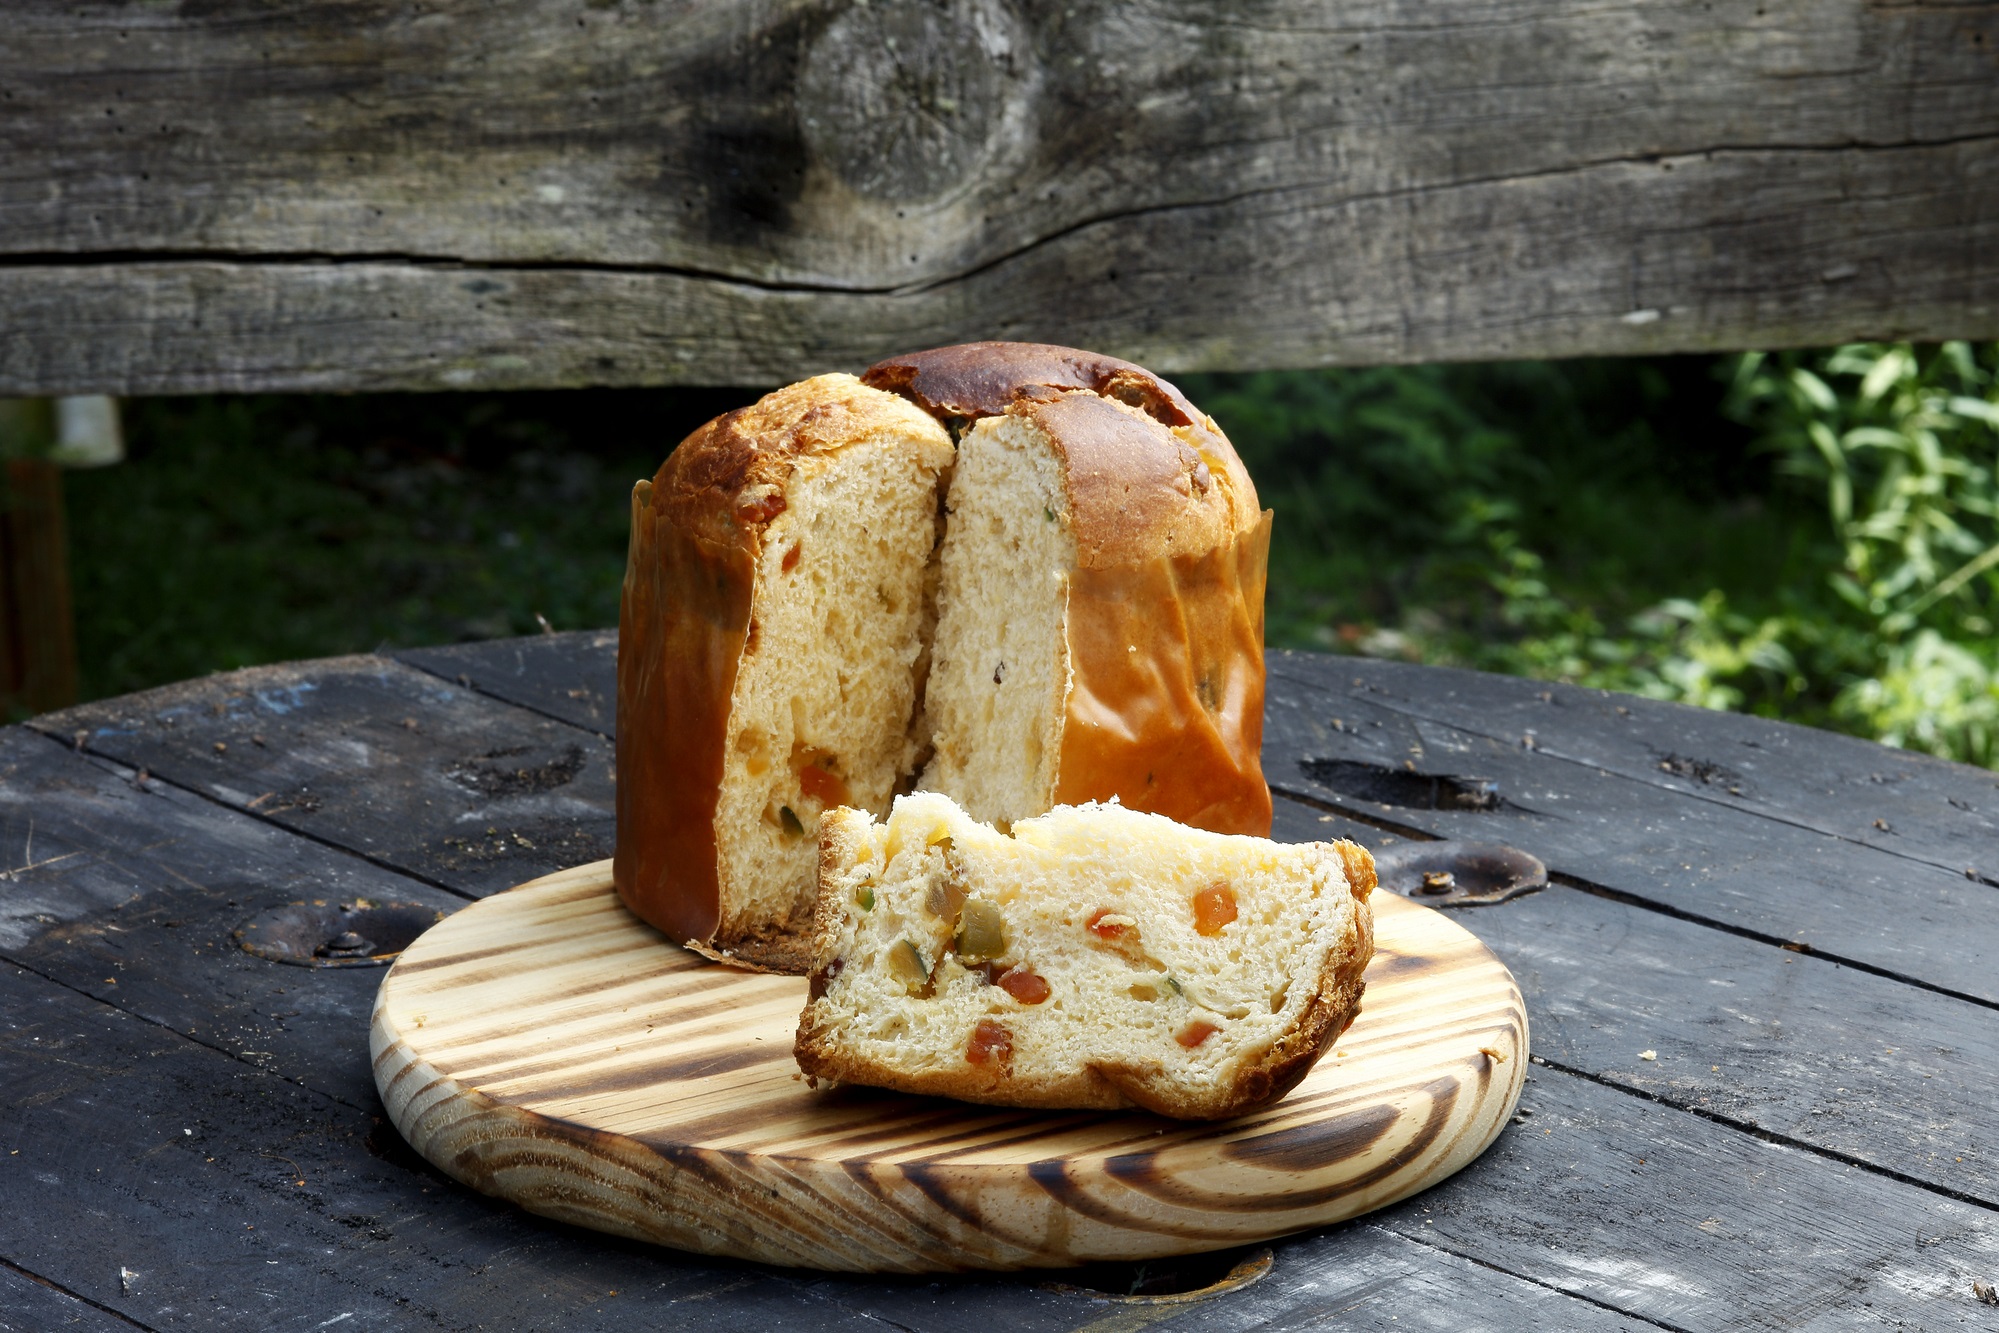 Panettone cake from Italy with candied orange pieces sliced open on a wooden cutting board